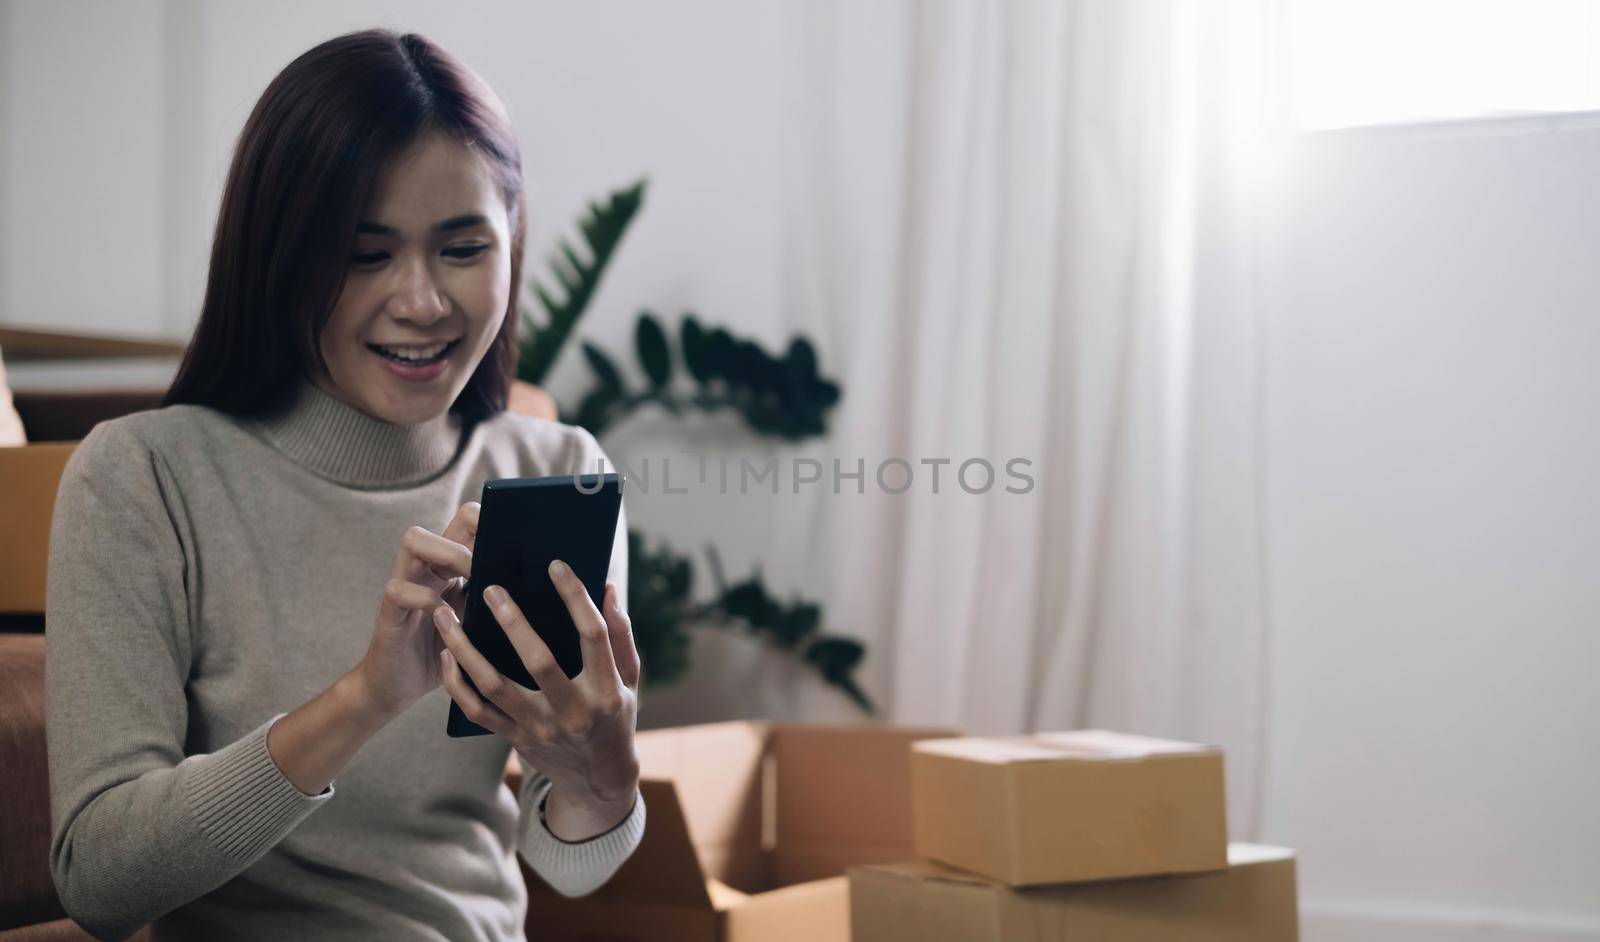 Starting Small business entrepreneur SME freelance,Portrait young woman working at home office, BOX,smartphone,laptop, online, marketing, packaging, delivery, SME, e-commerce concept by wichayada